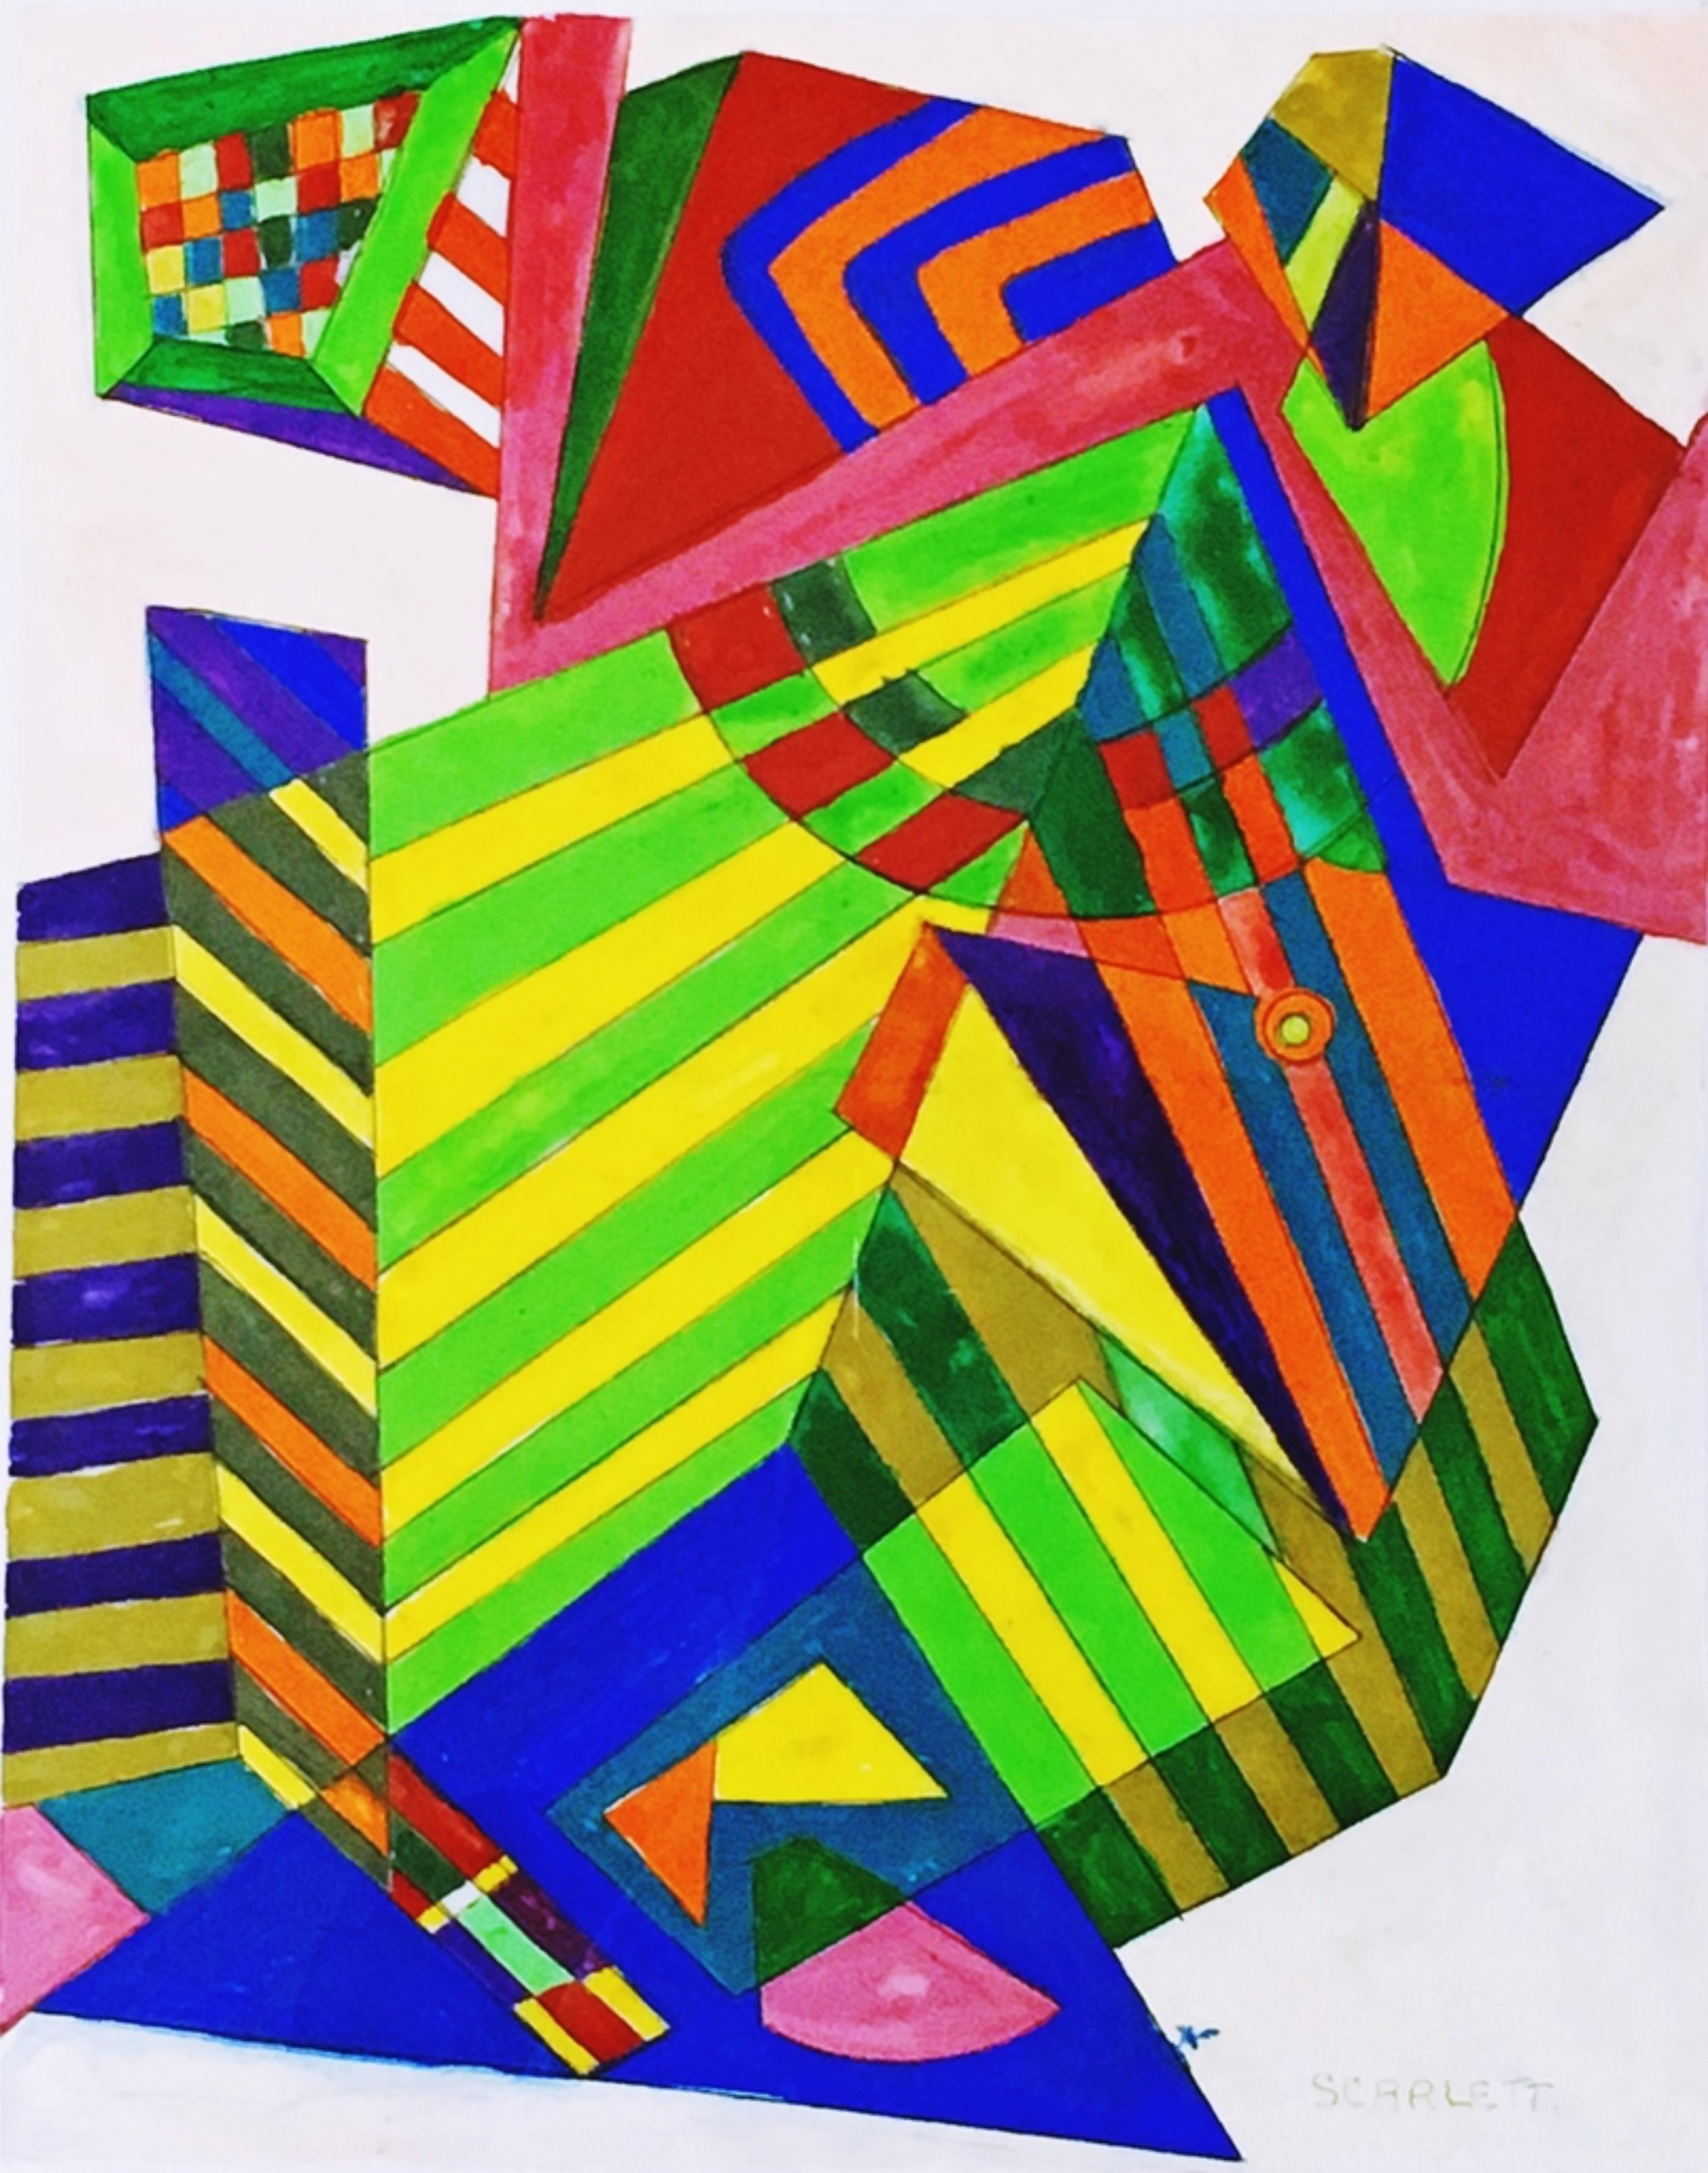 Untitled Mid-Century Modern Geometric Abstraction - Painting by Rolph Scarlett